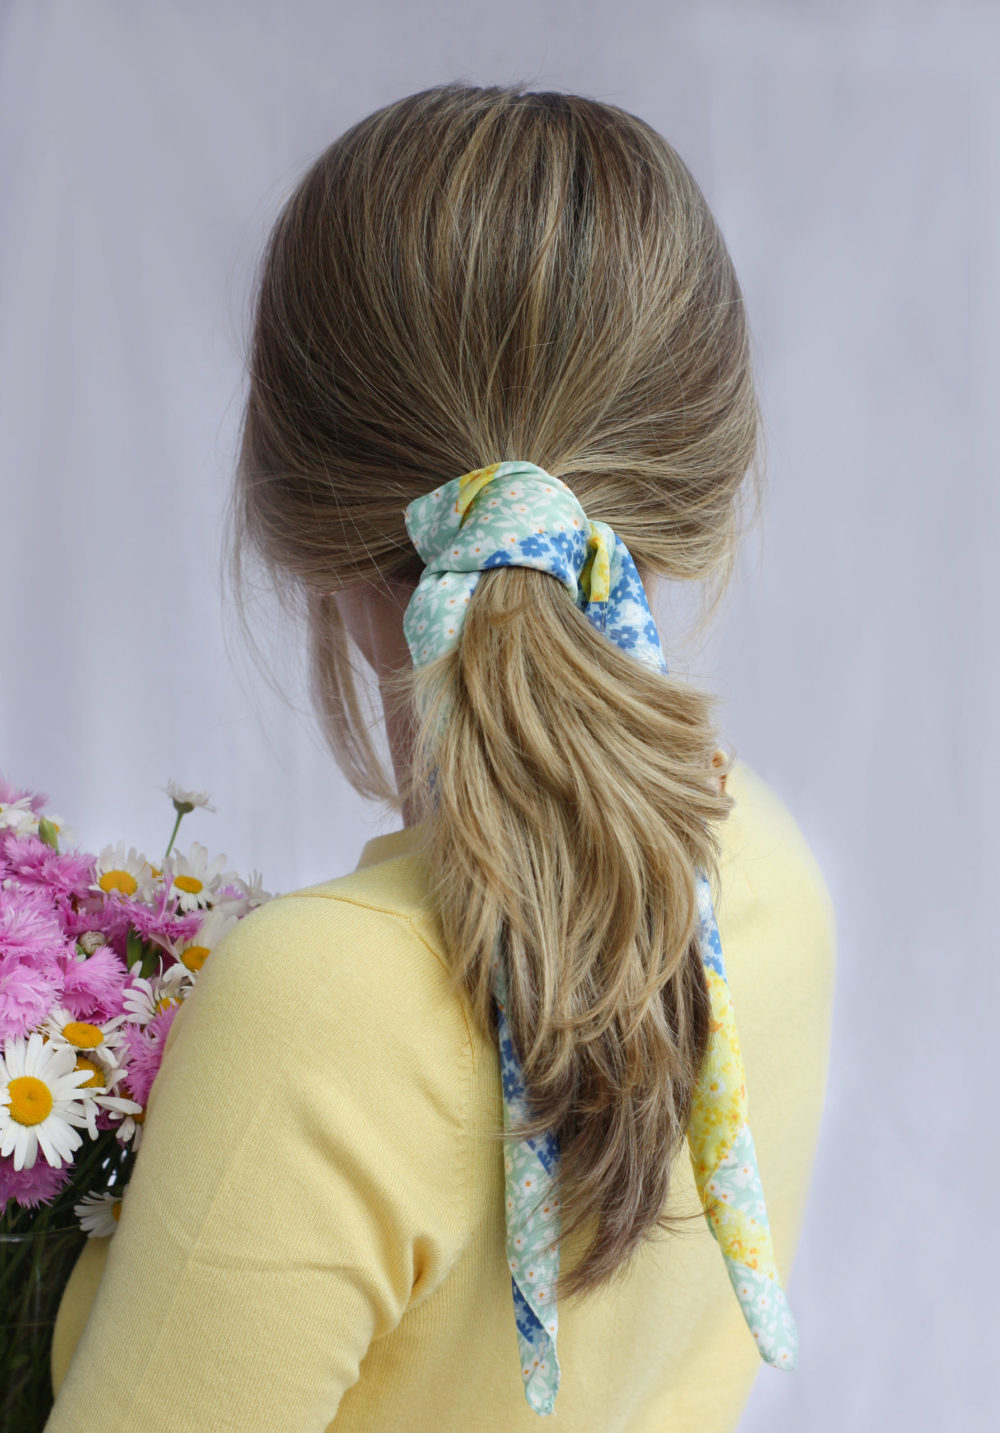 Scarf-Tied Low Pony, an easy hairstyle for women